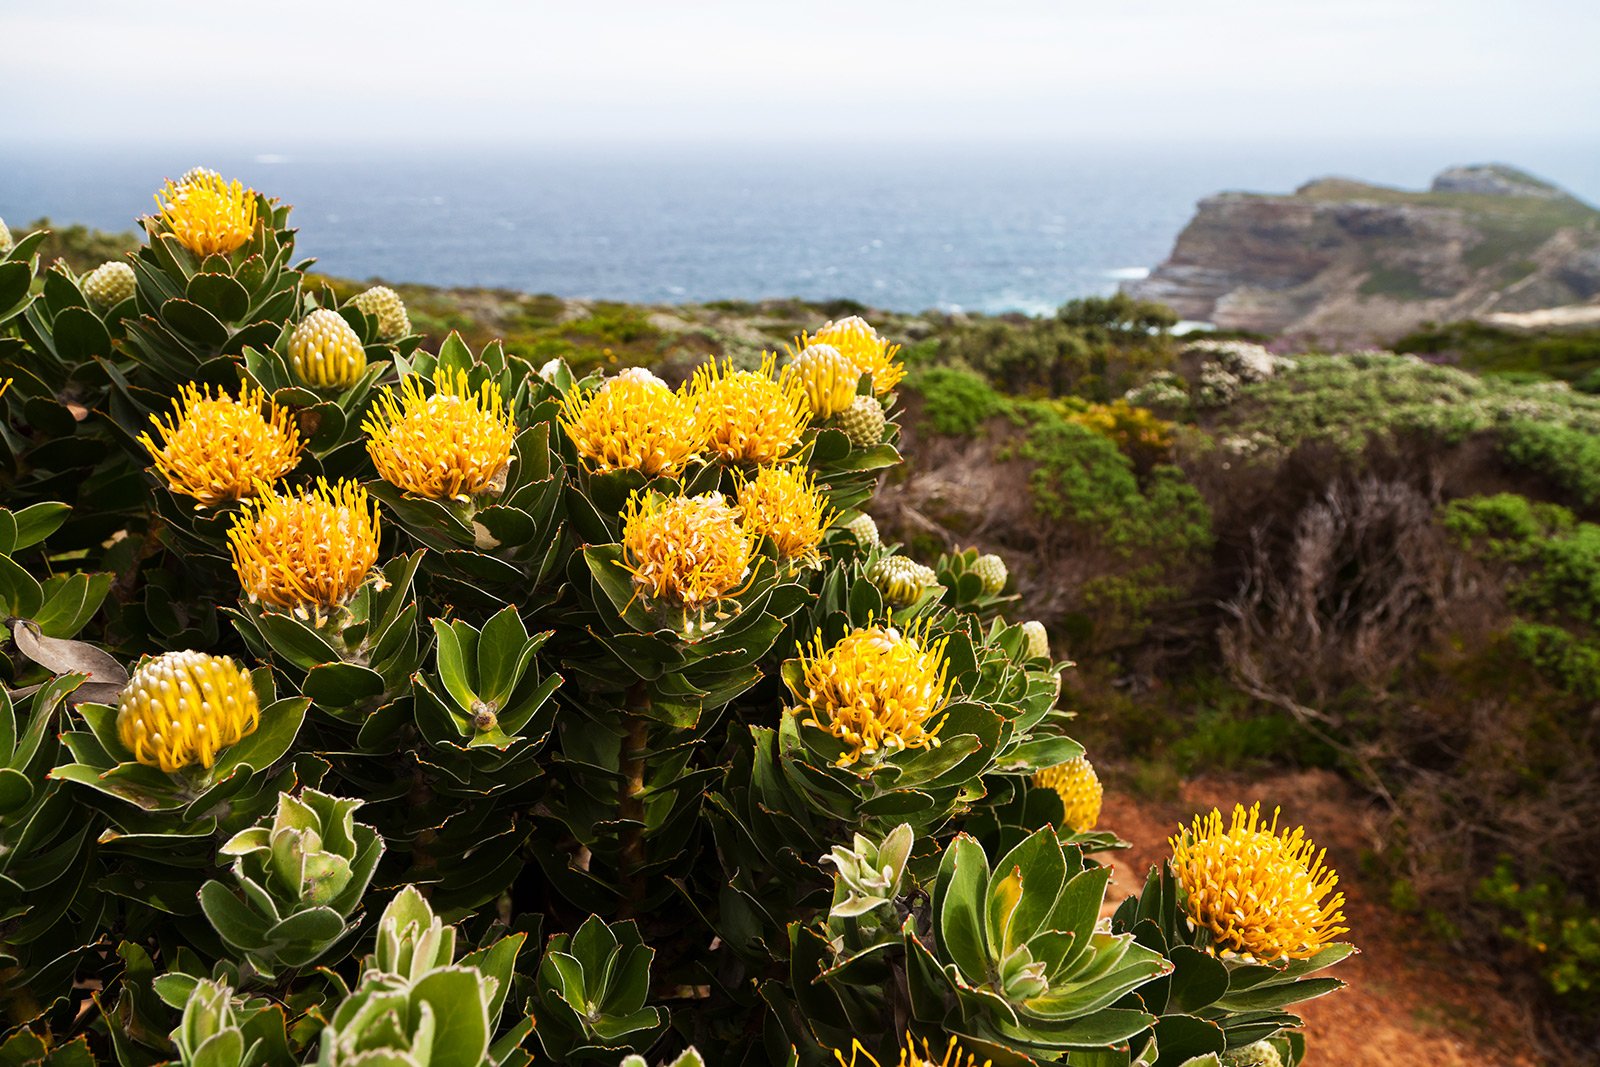 How to find protea – the symbol of the RSA in Cape Town